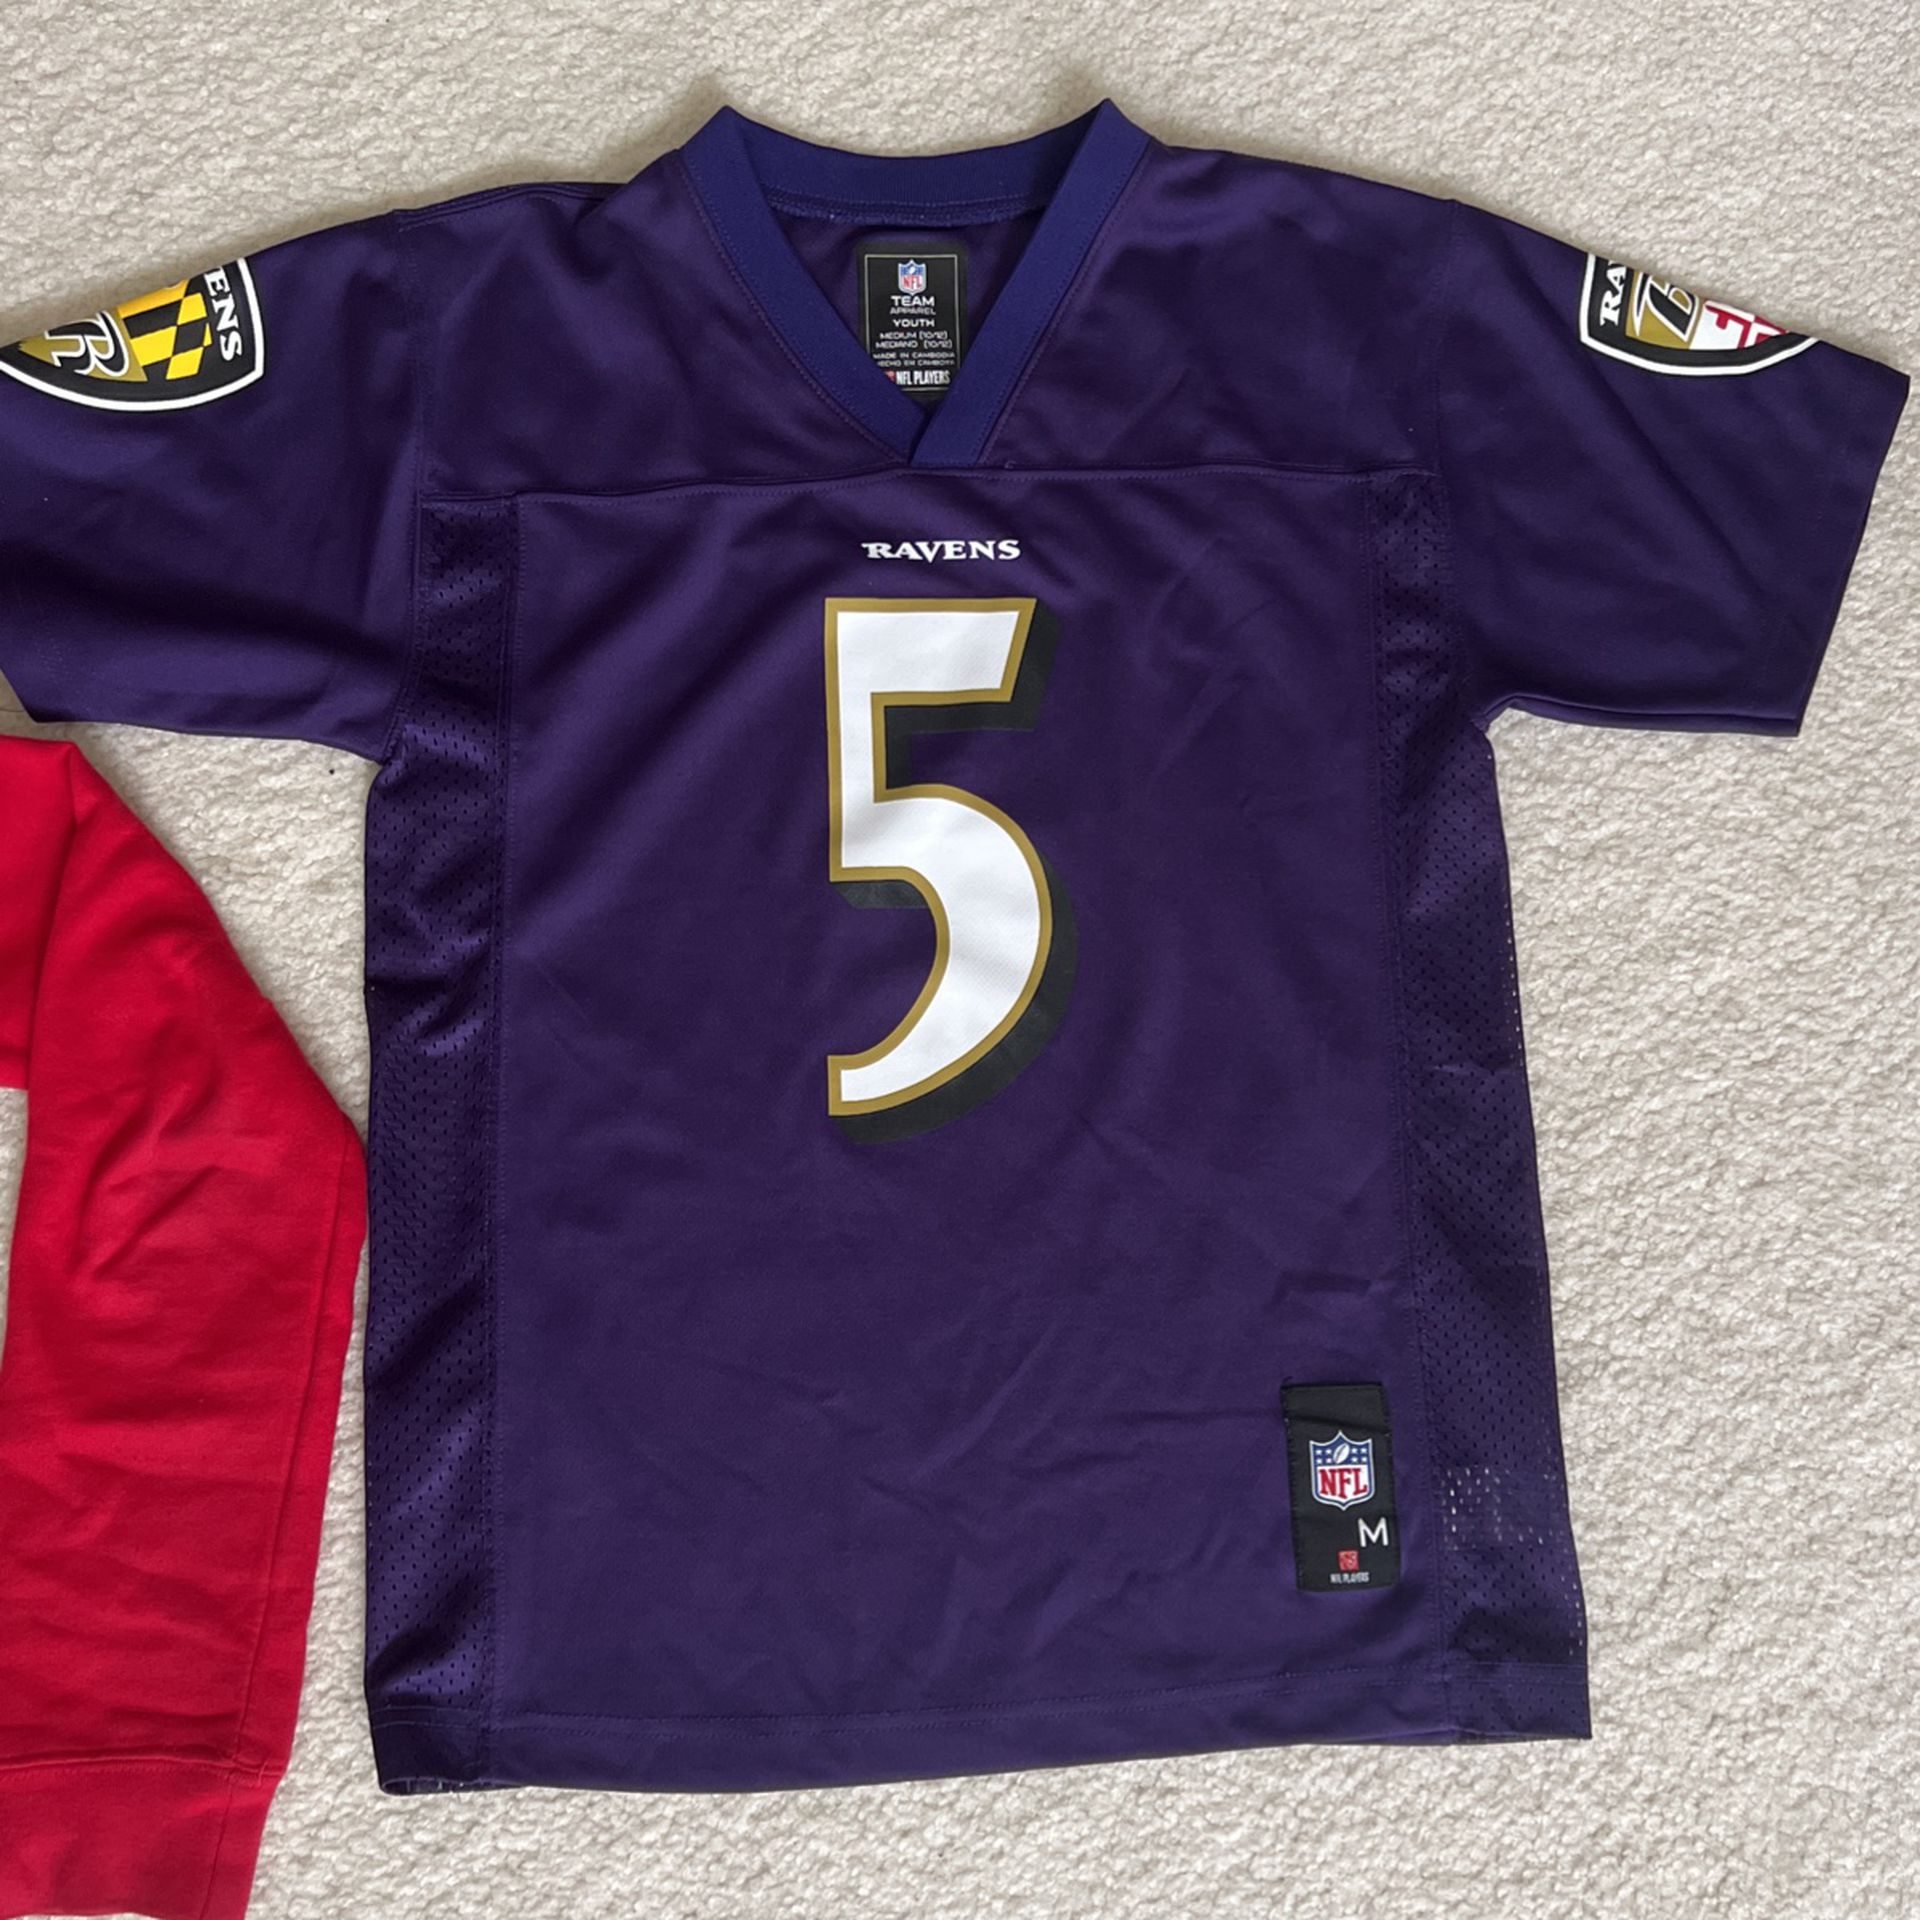 Boys NFL Youth Medium (10-12 yrs ) Clothes . Official NFL Brand. Excellent Condition .